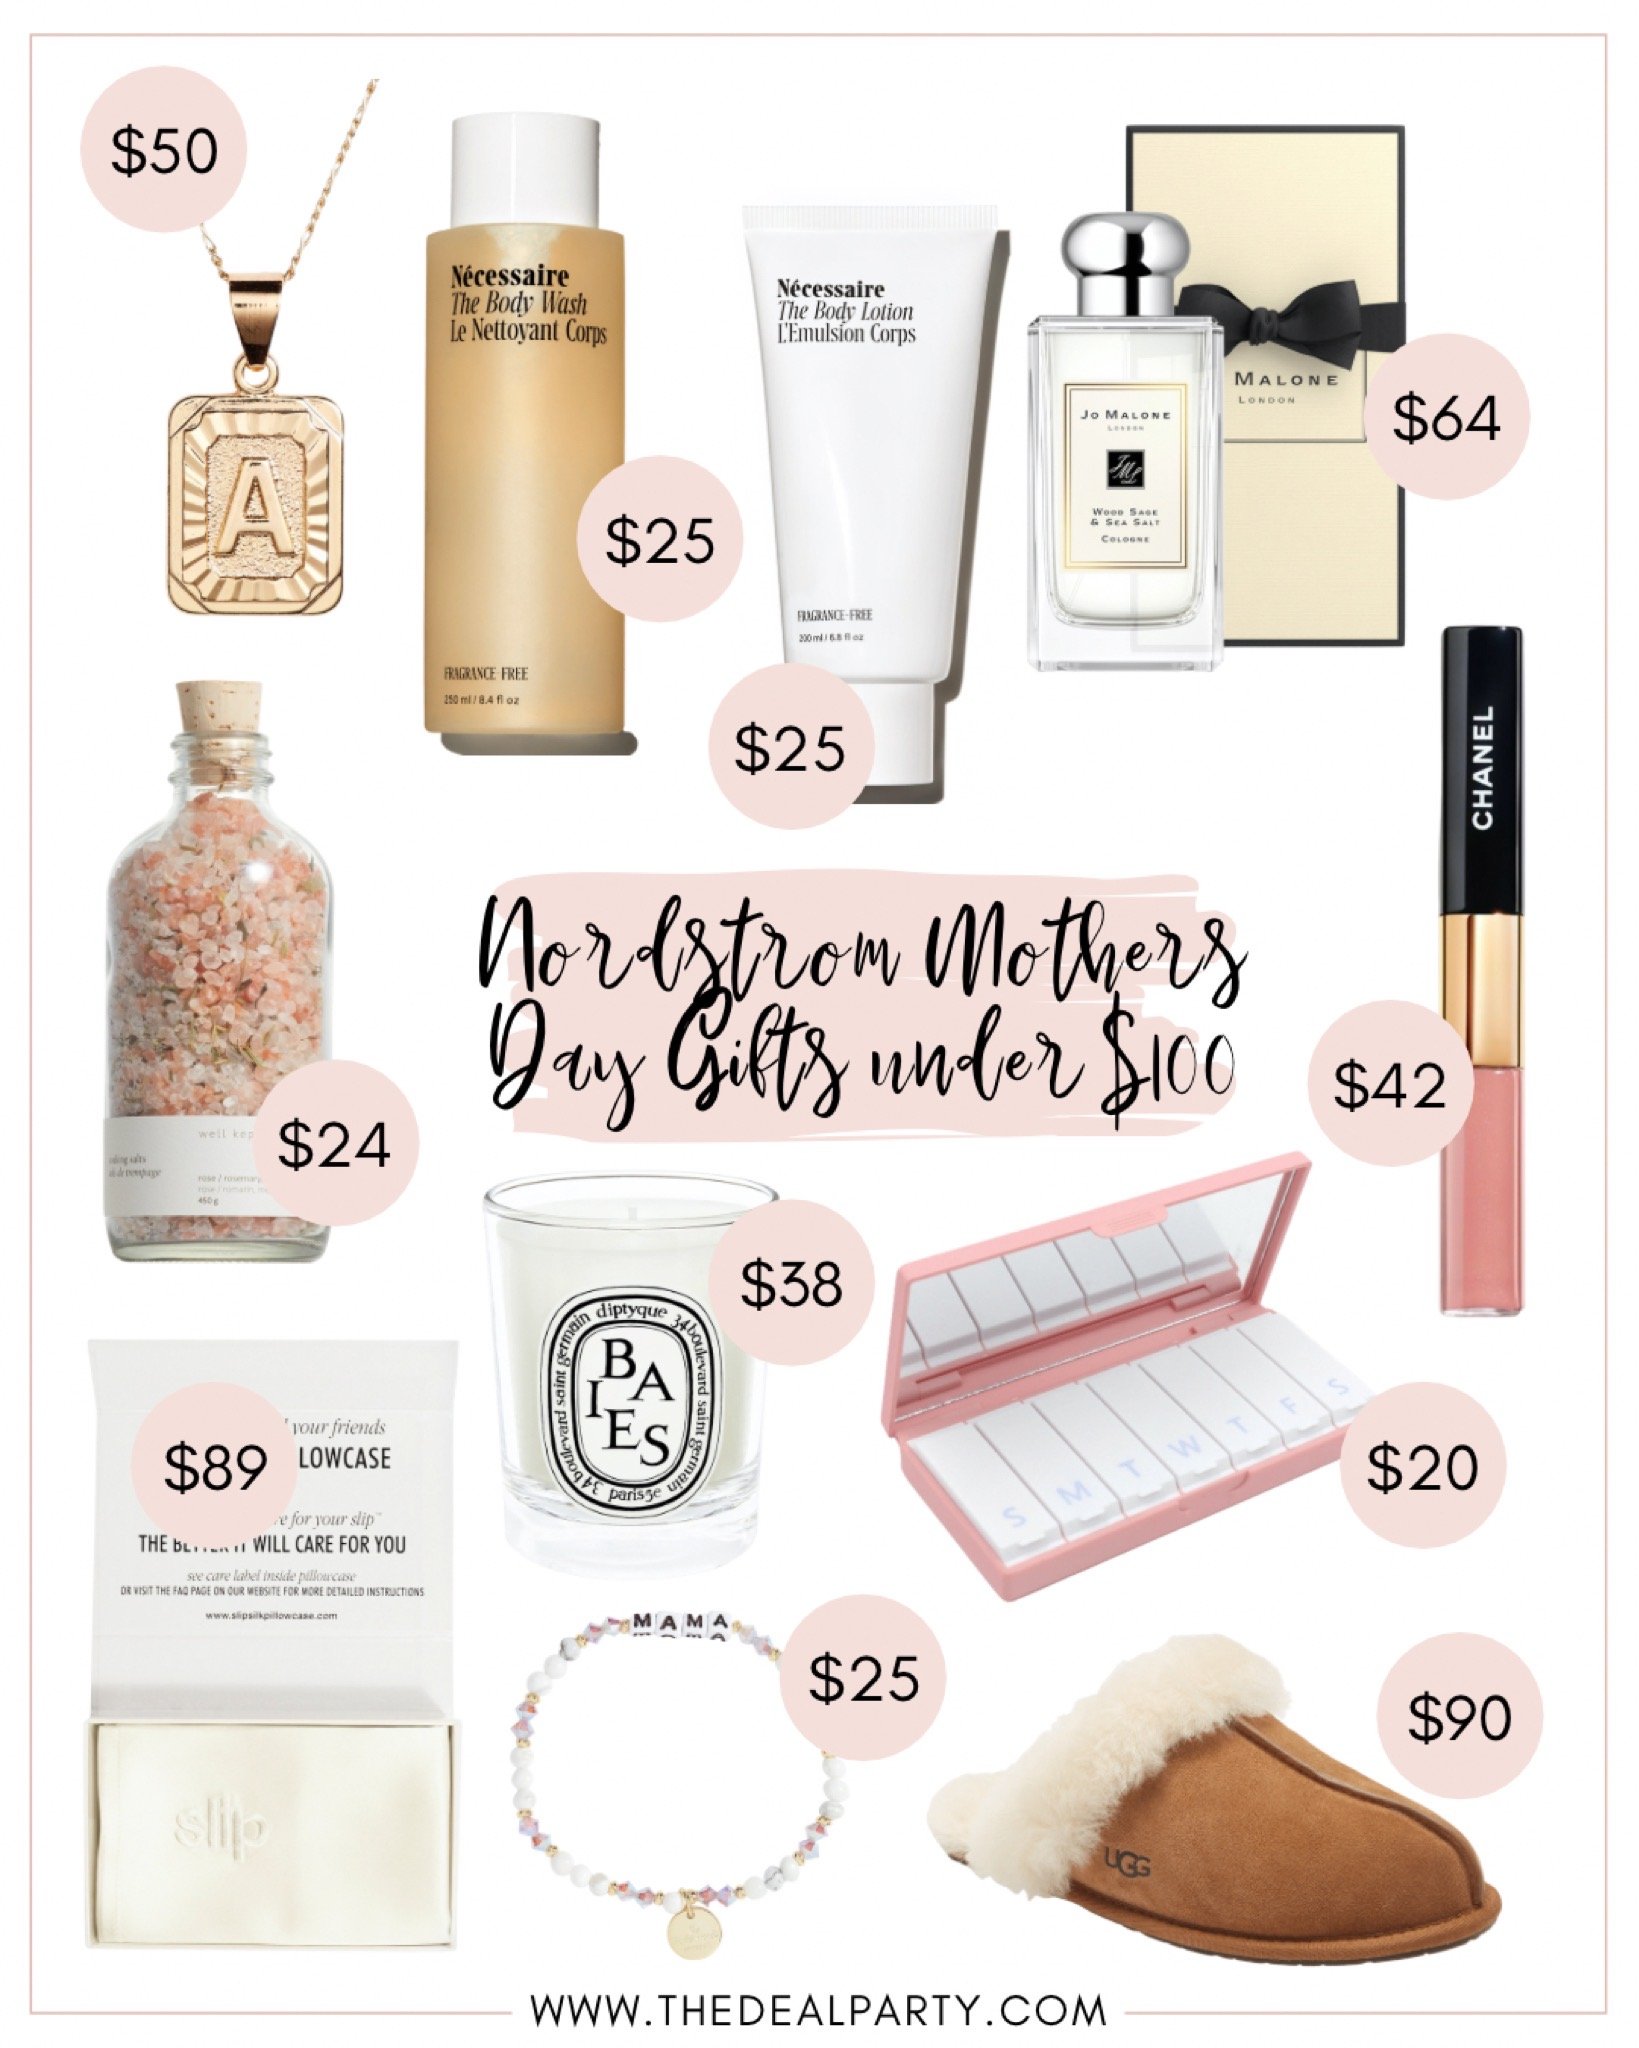 Make a Girl Swoon This Valentines for Under $50! - SINCERELY OPHELIA